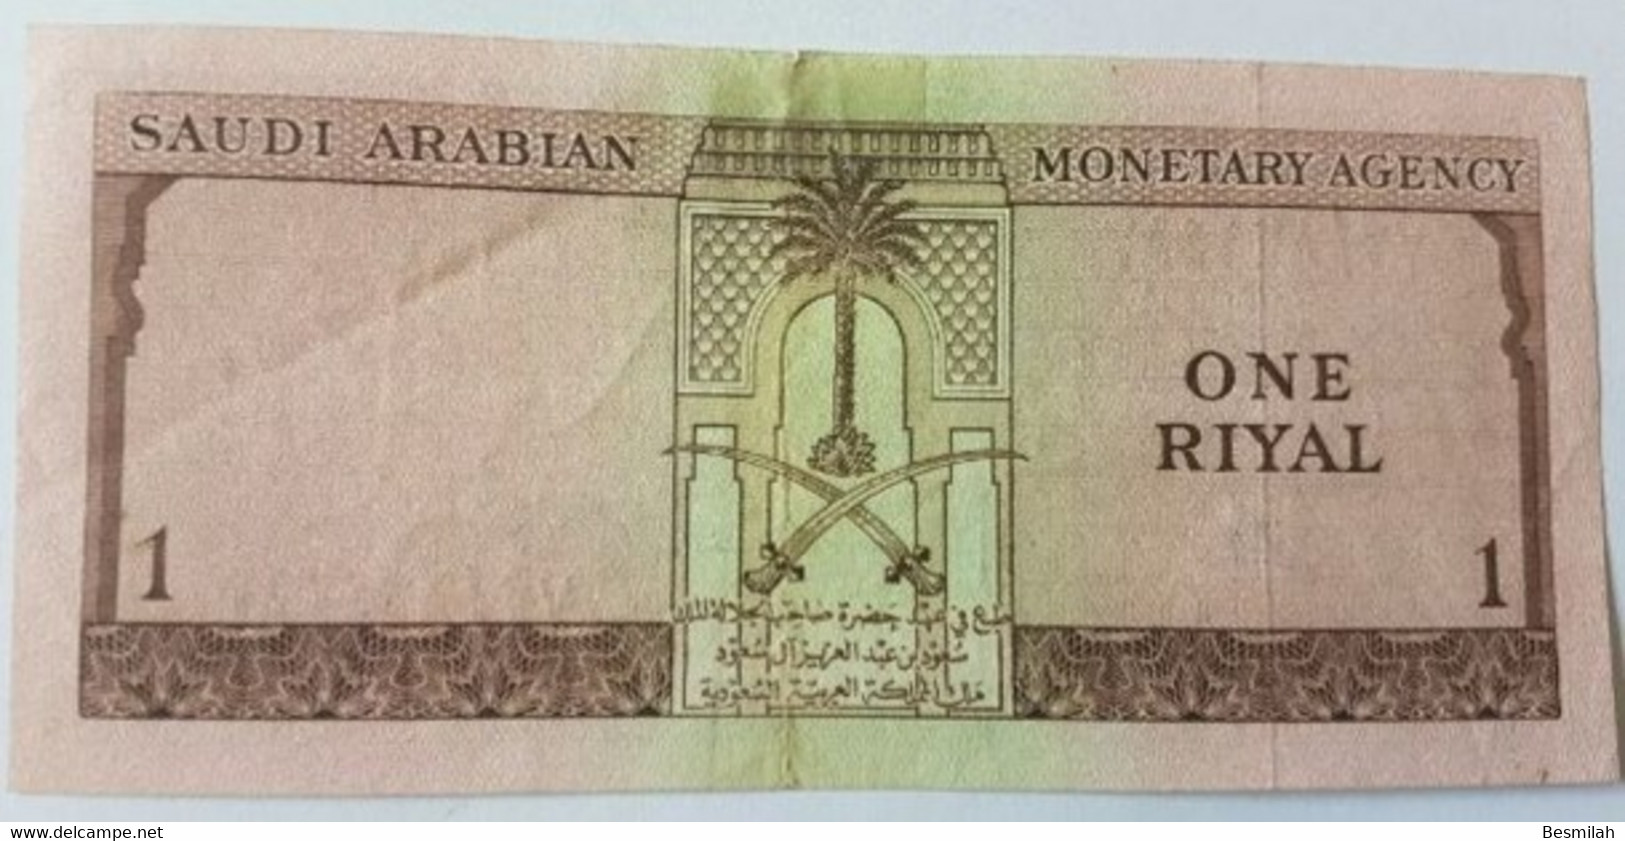 Saudi Arabia 1 Riyal 1961 P-6 XF-AU Condition, Small Fold As Shown And Tape In The Top Front. Look At The Picture. - Arabie Saoudite